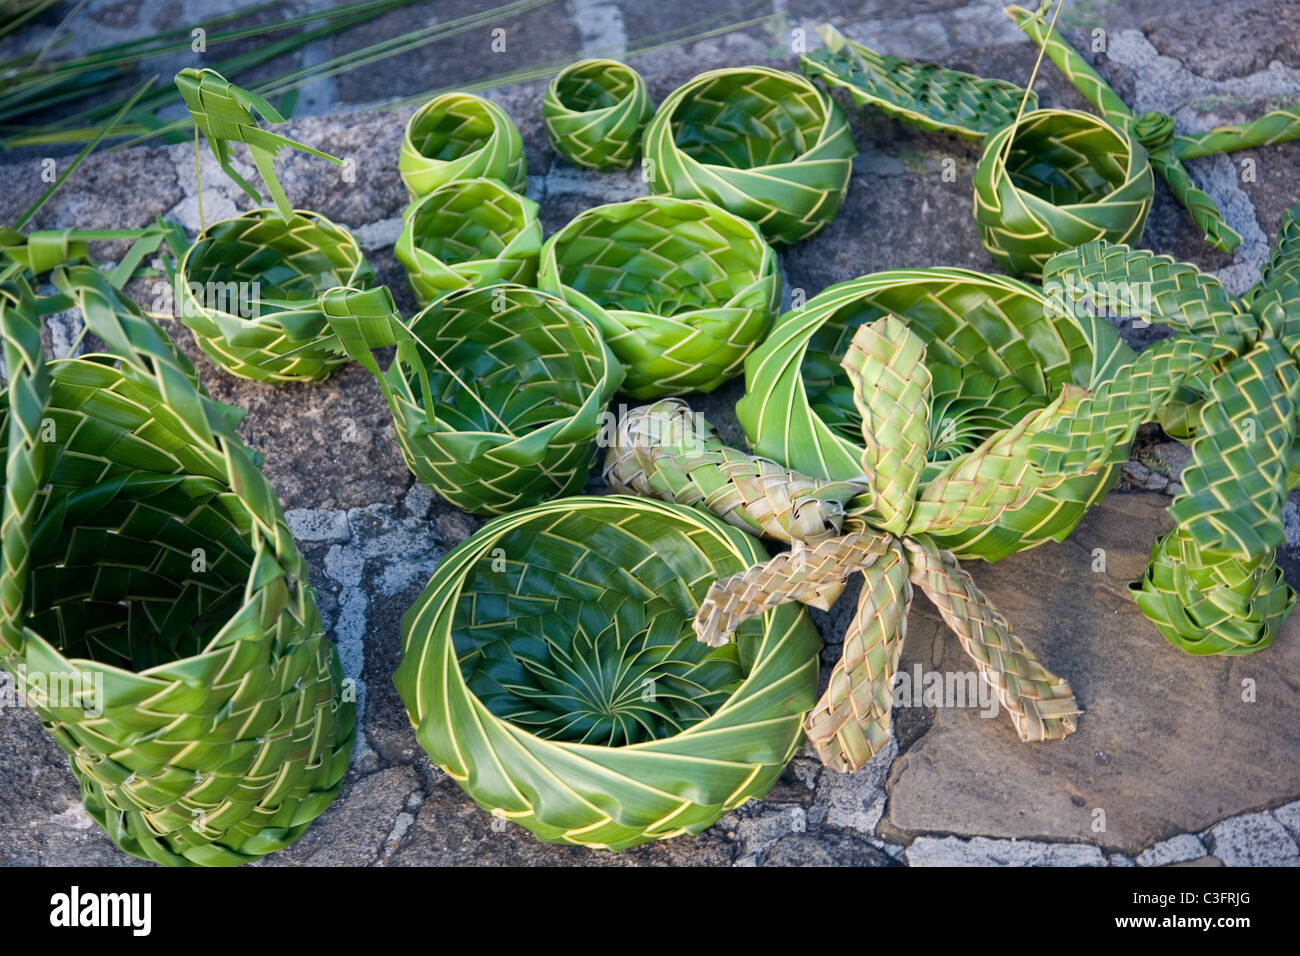 Antiguan woven objects made of palm leaves Stock Photo